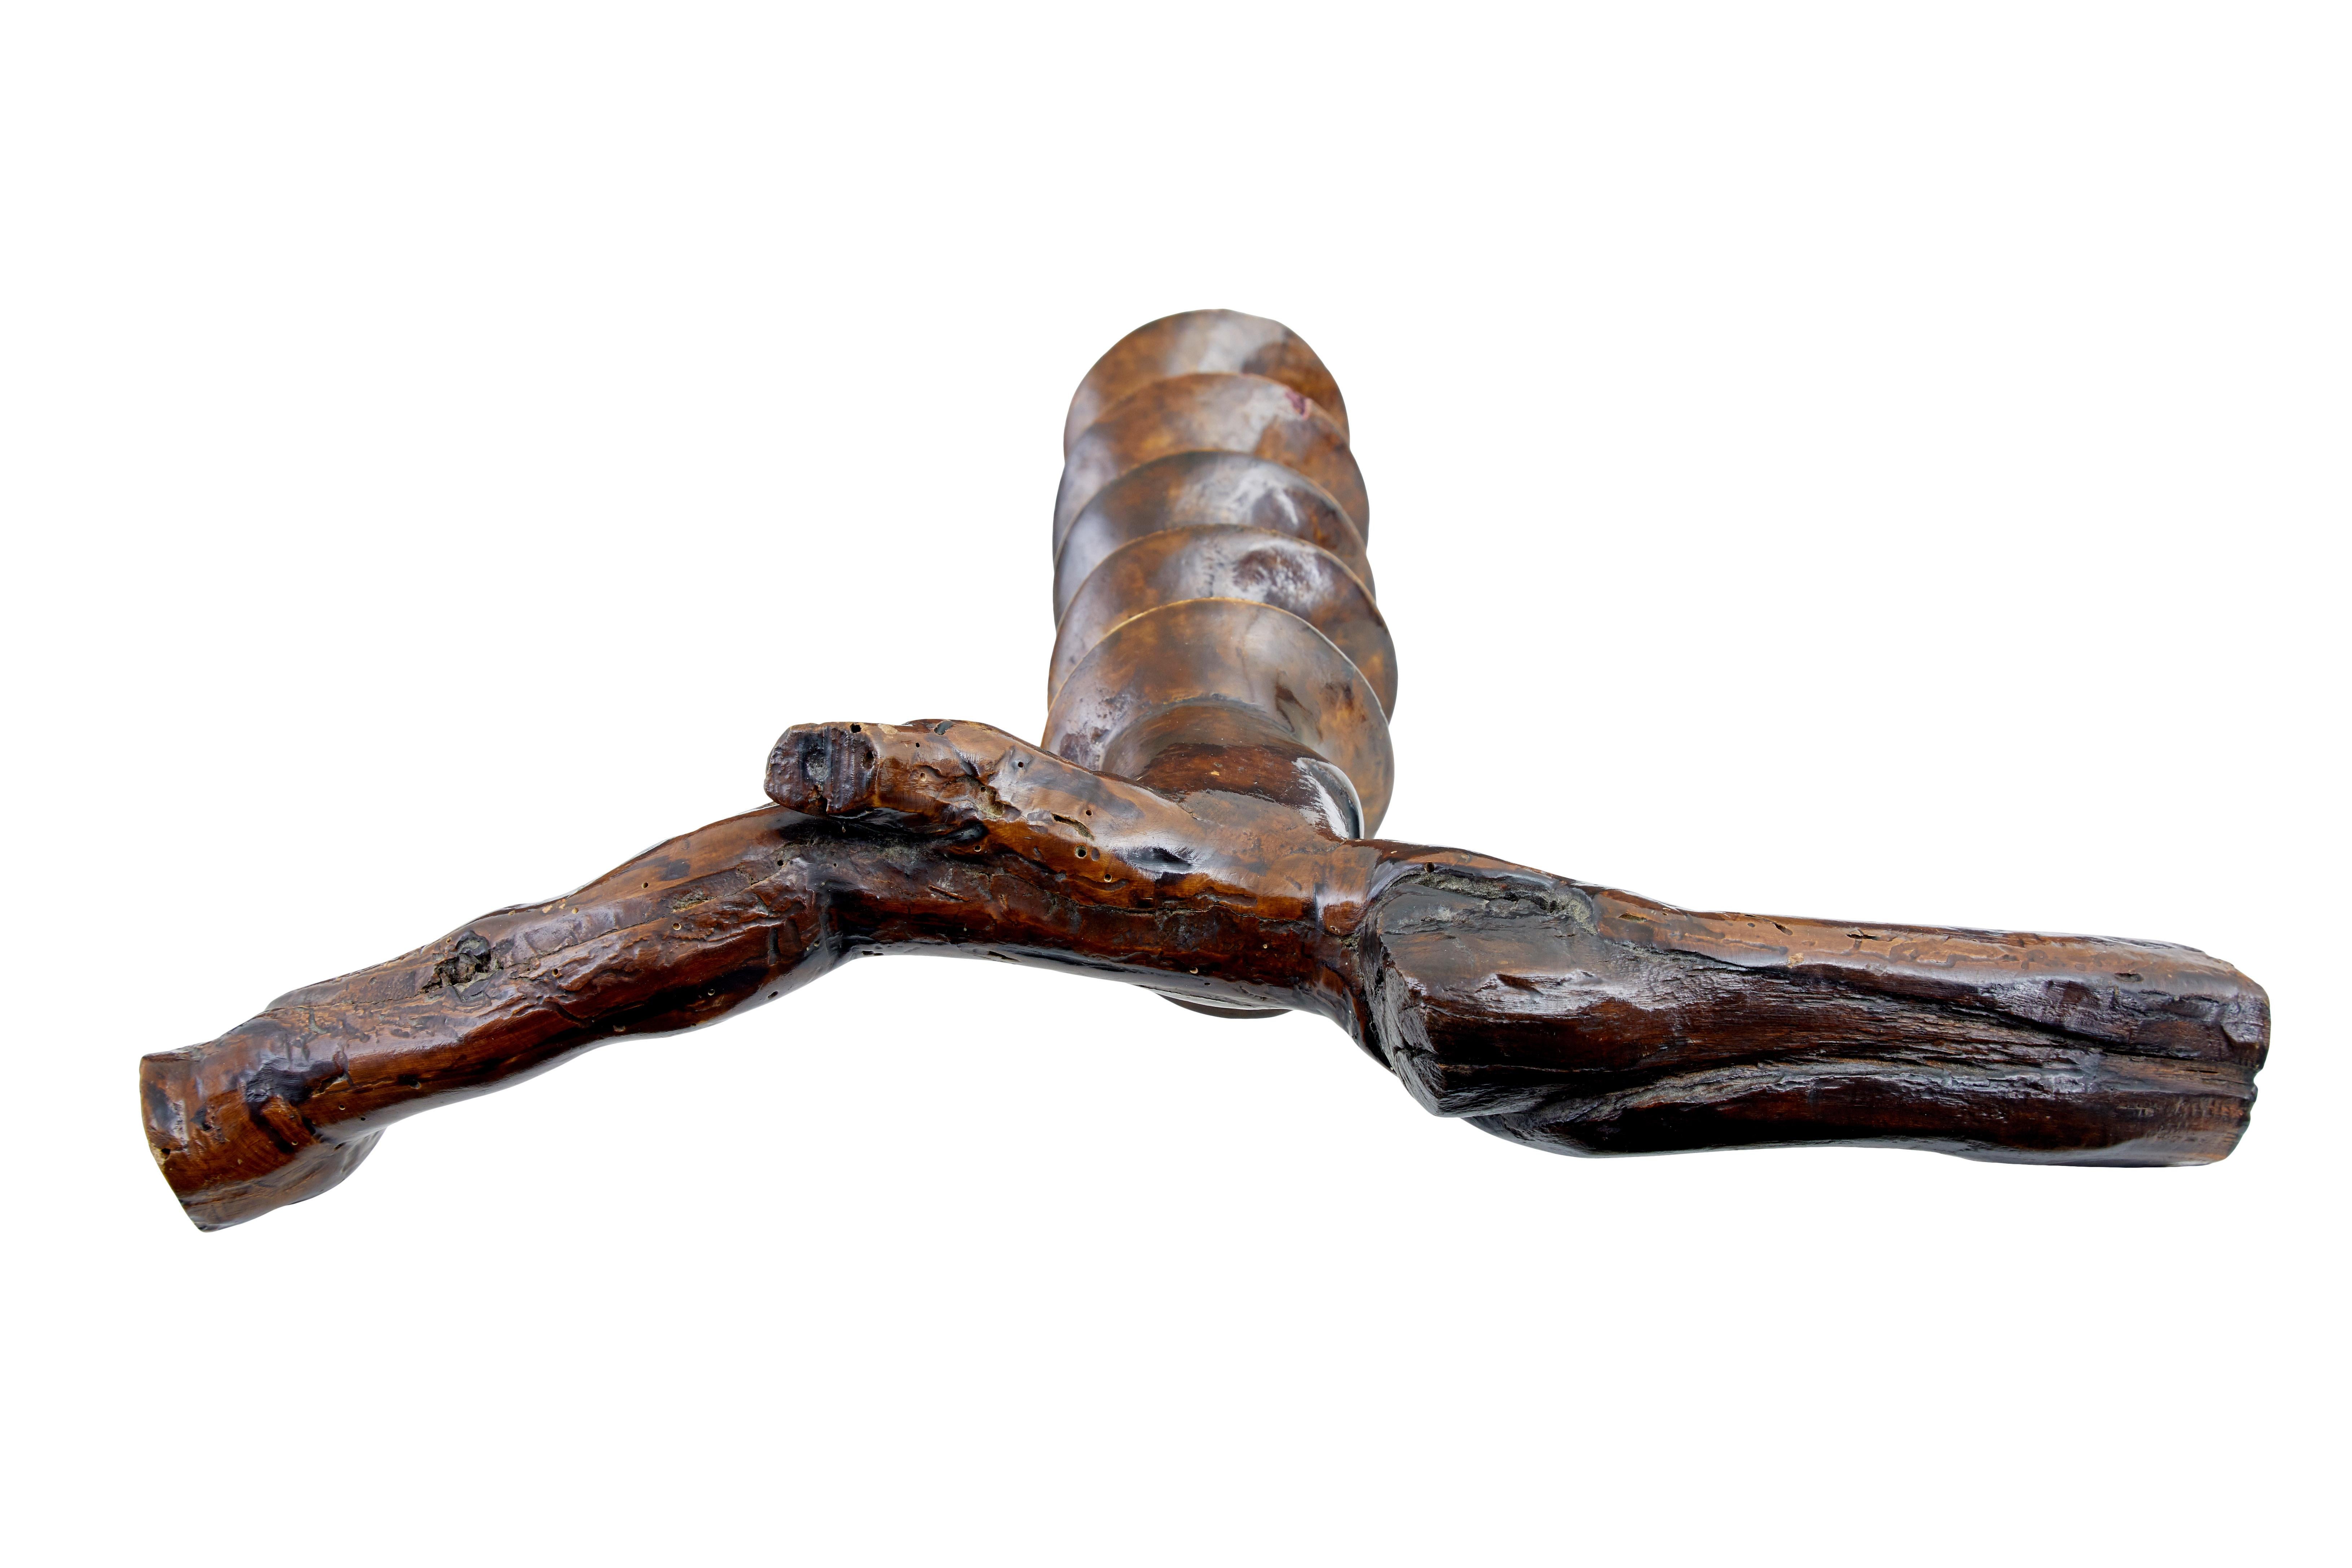 Rare 19th century decorative carved treen corkscrew circa 1880.

Superb decorative piece of treen hand carved using a hardwood.  Due to the oversized nature of this piece it would make a superb wall hanging piece in any kitchen or dining